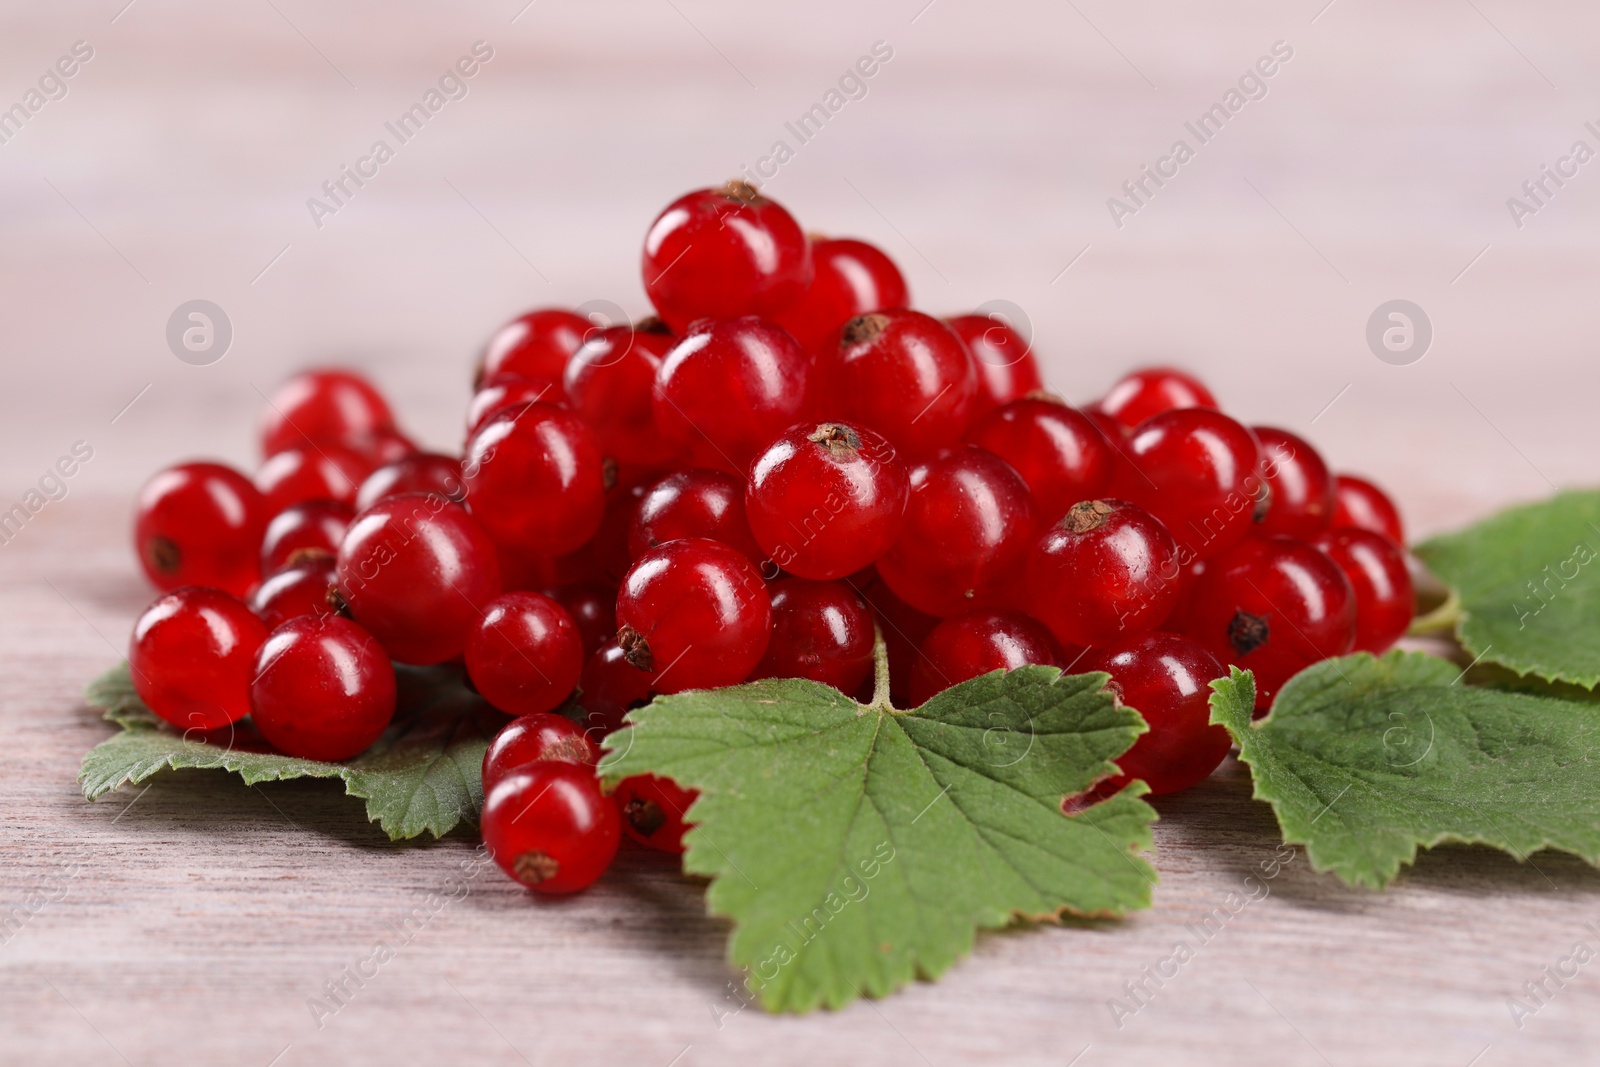 Photo of Ripe red currants on light wooden table, closeup